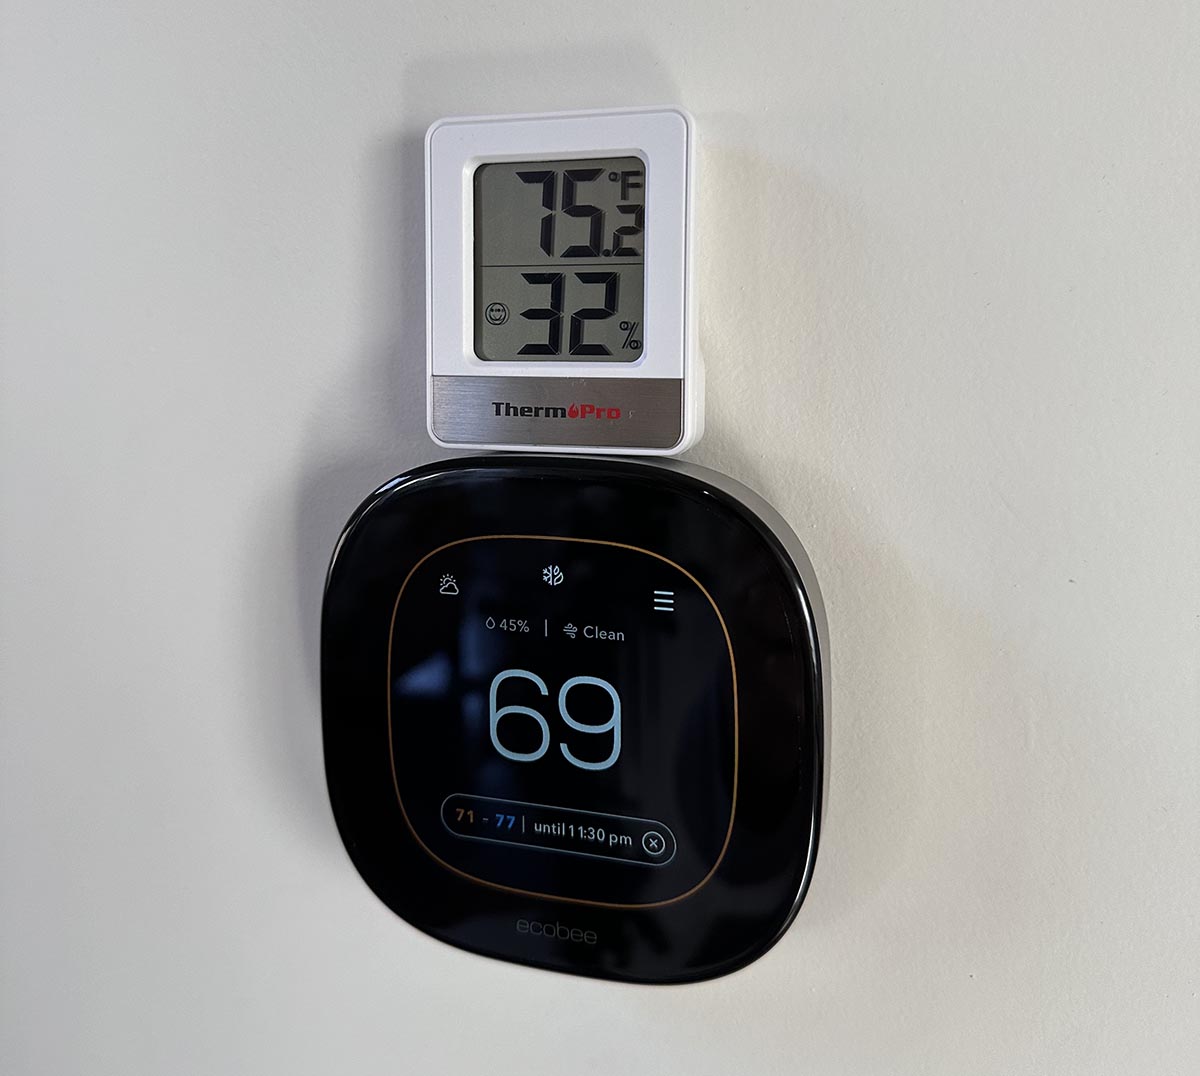 The Ecobee Premium Smart Thermostat installed during testing before being excluded from our list of recommended products.